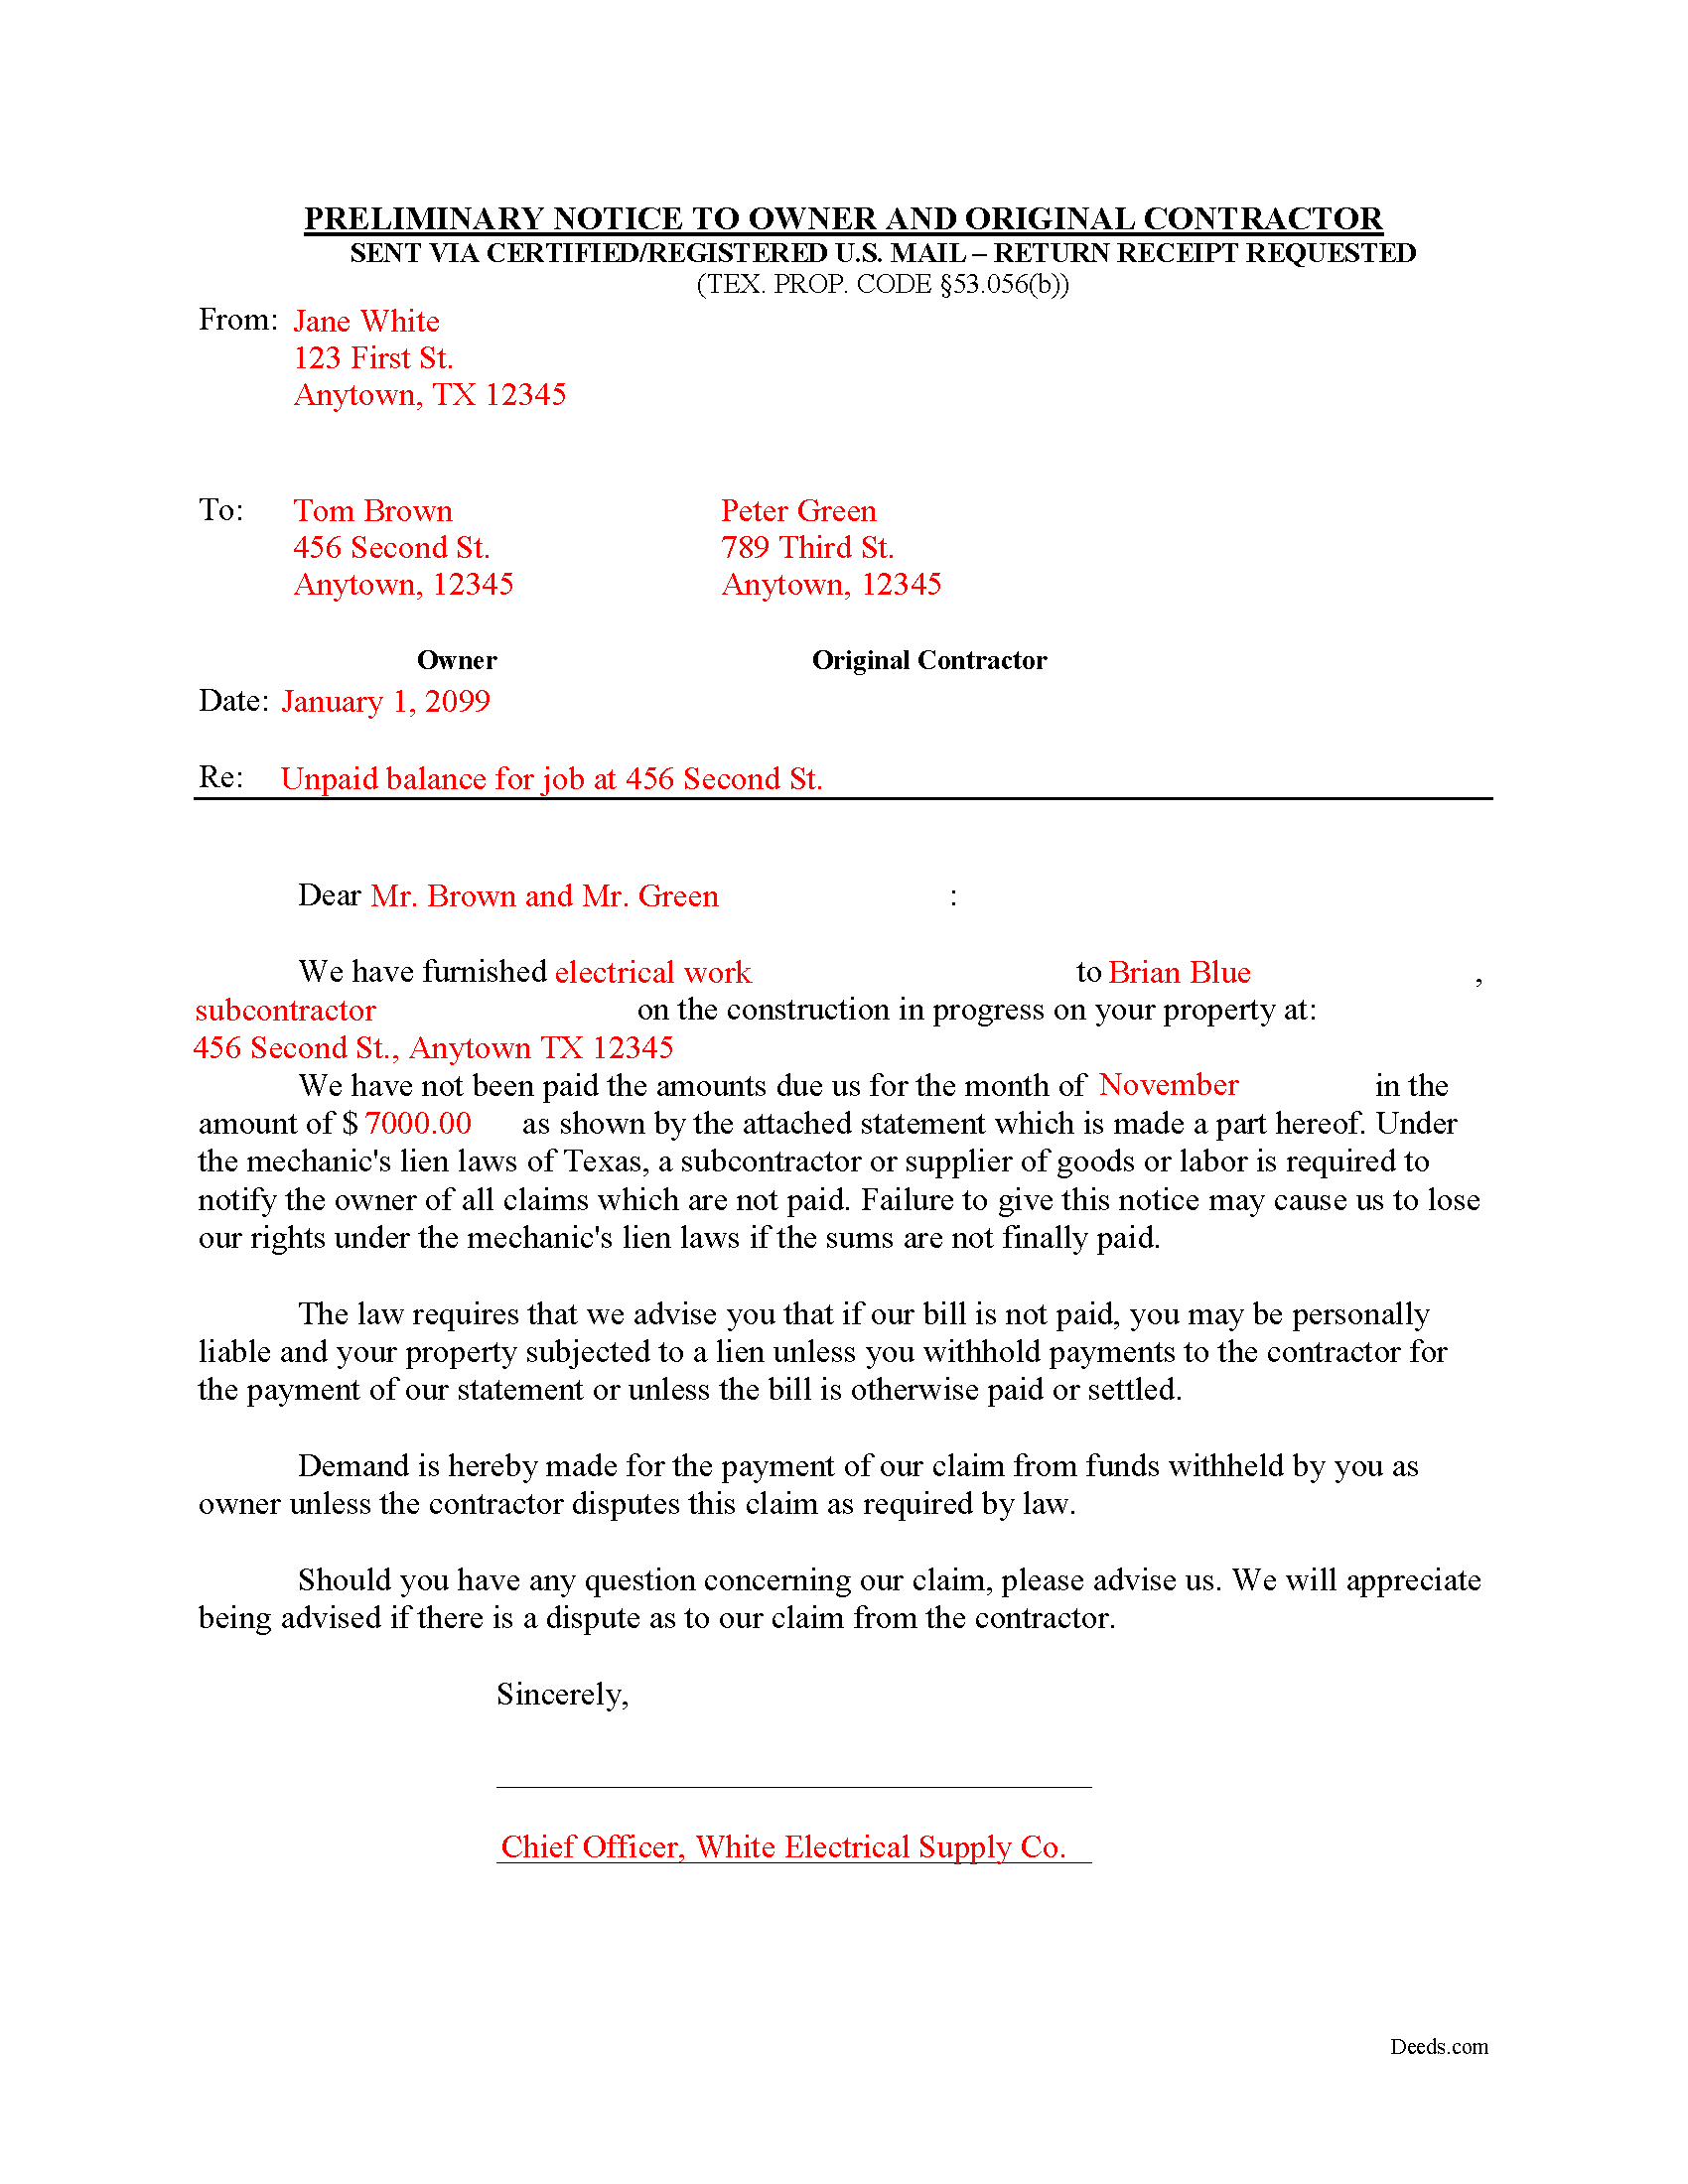 Completed Example of the Preliminary Notice to Owner and Original Contractor Document